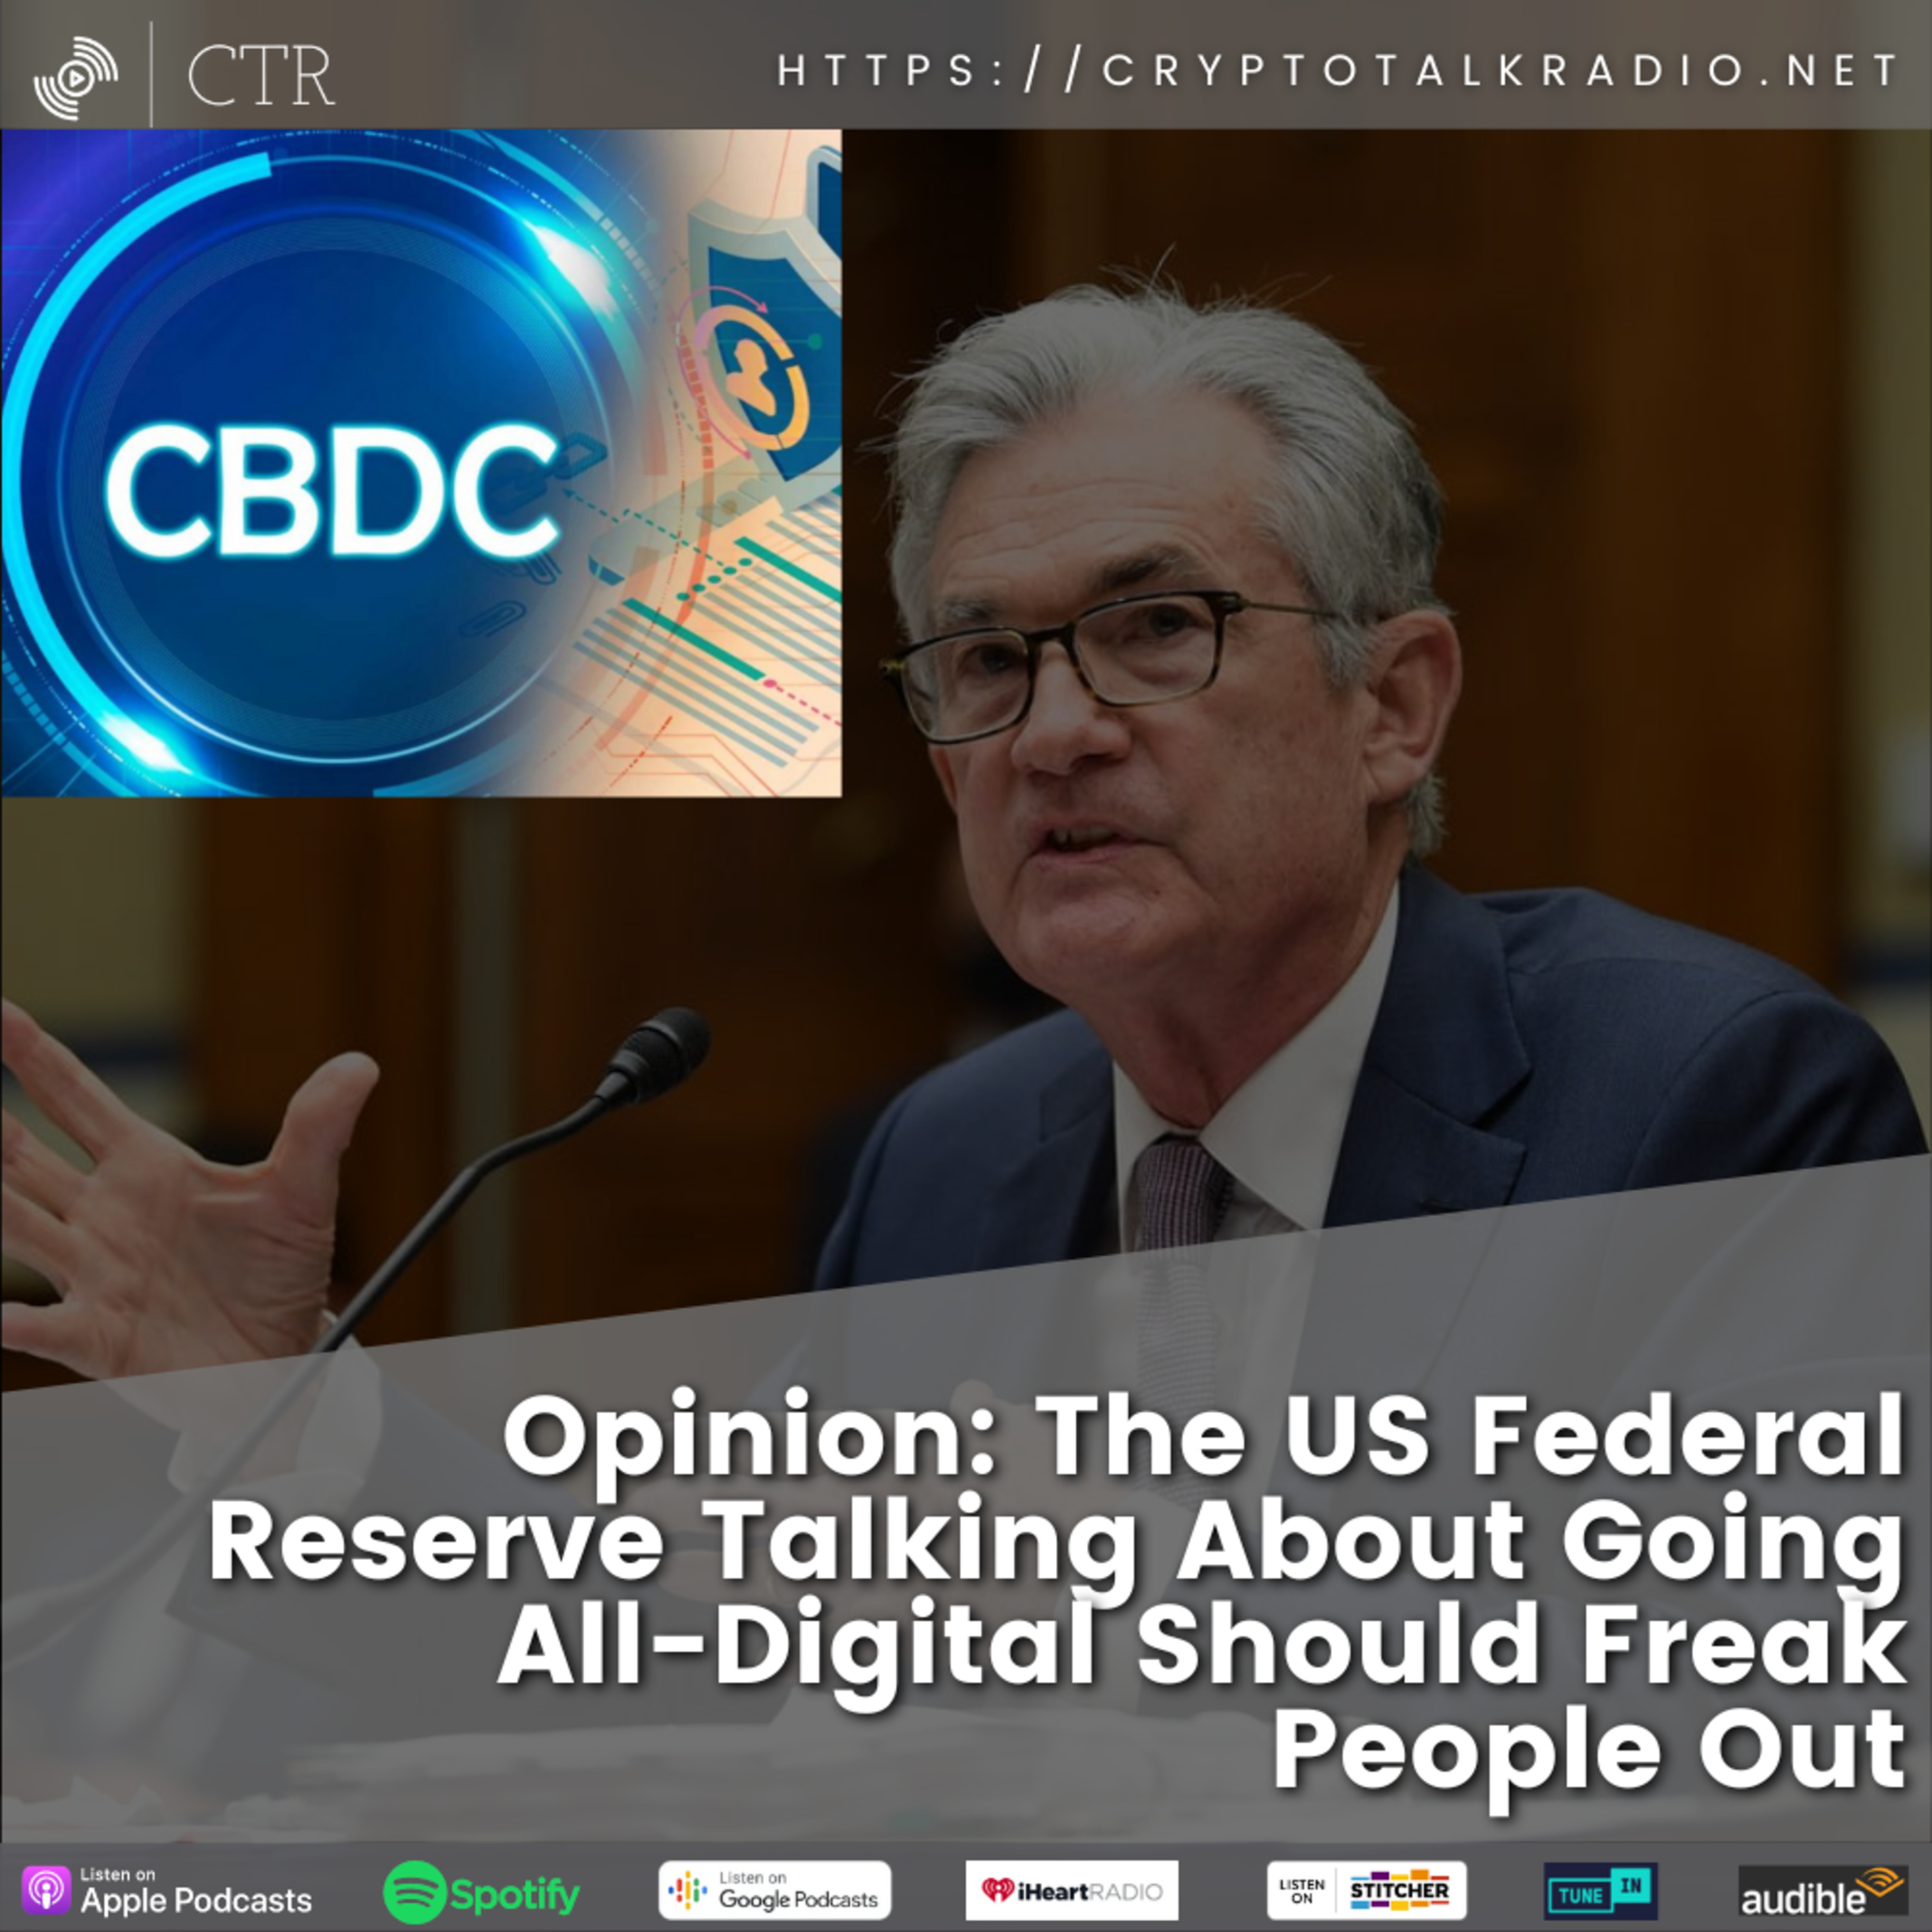 OPINION: The US Federal Reserve Talking About Going All-Digital Should Freak People Out